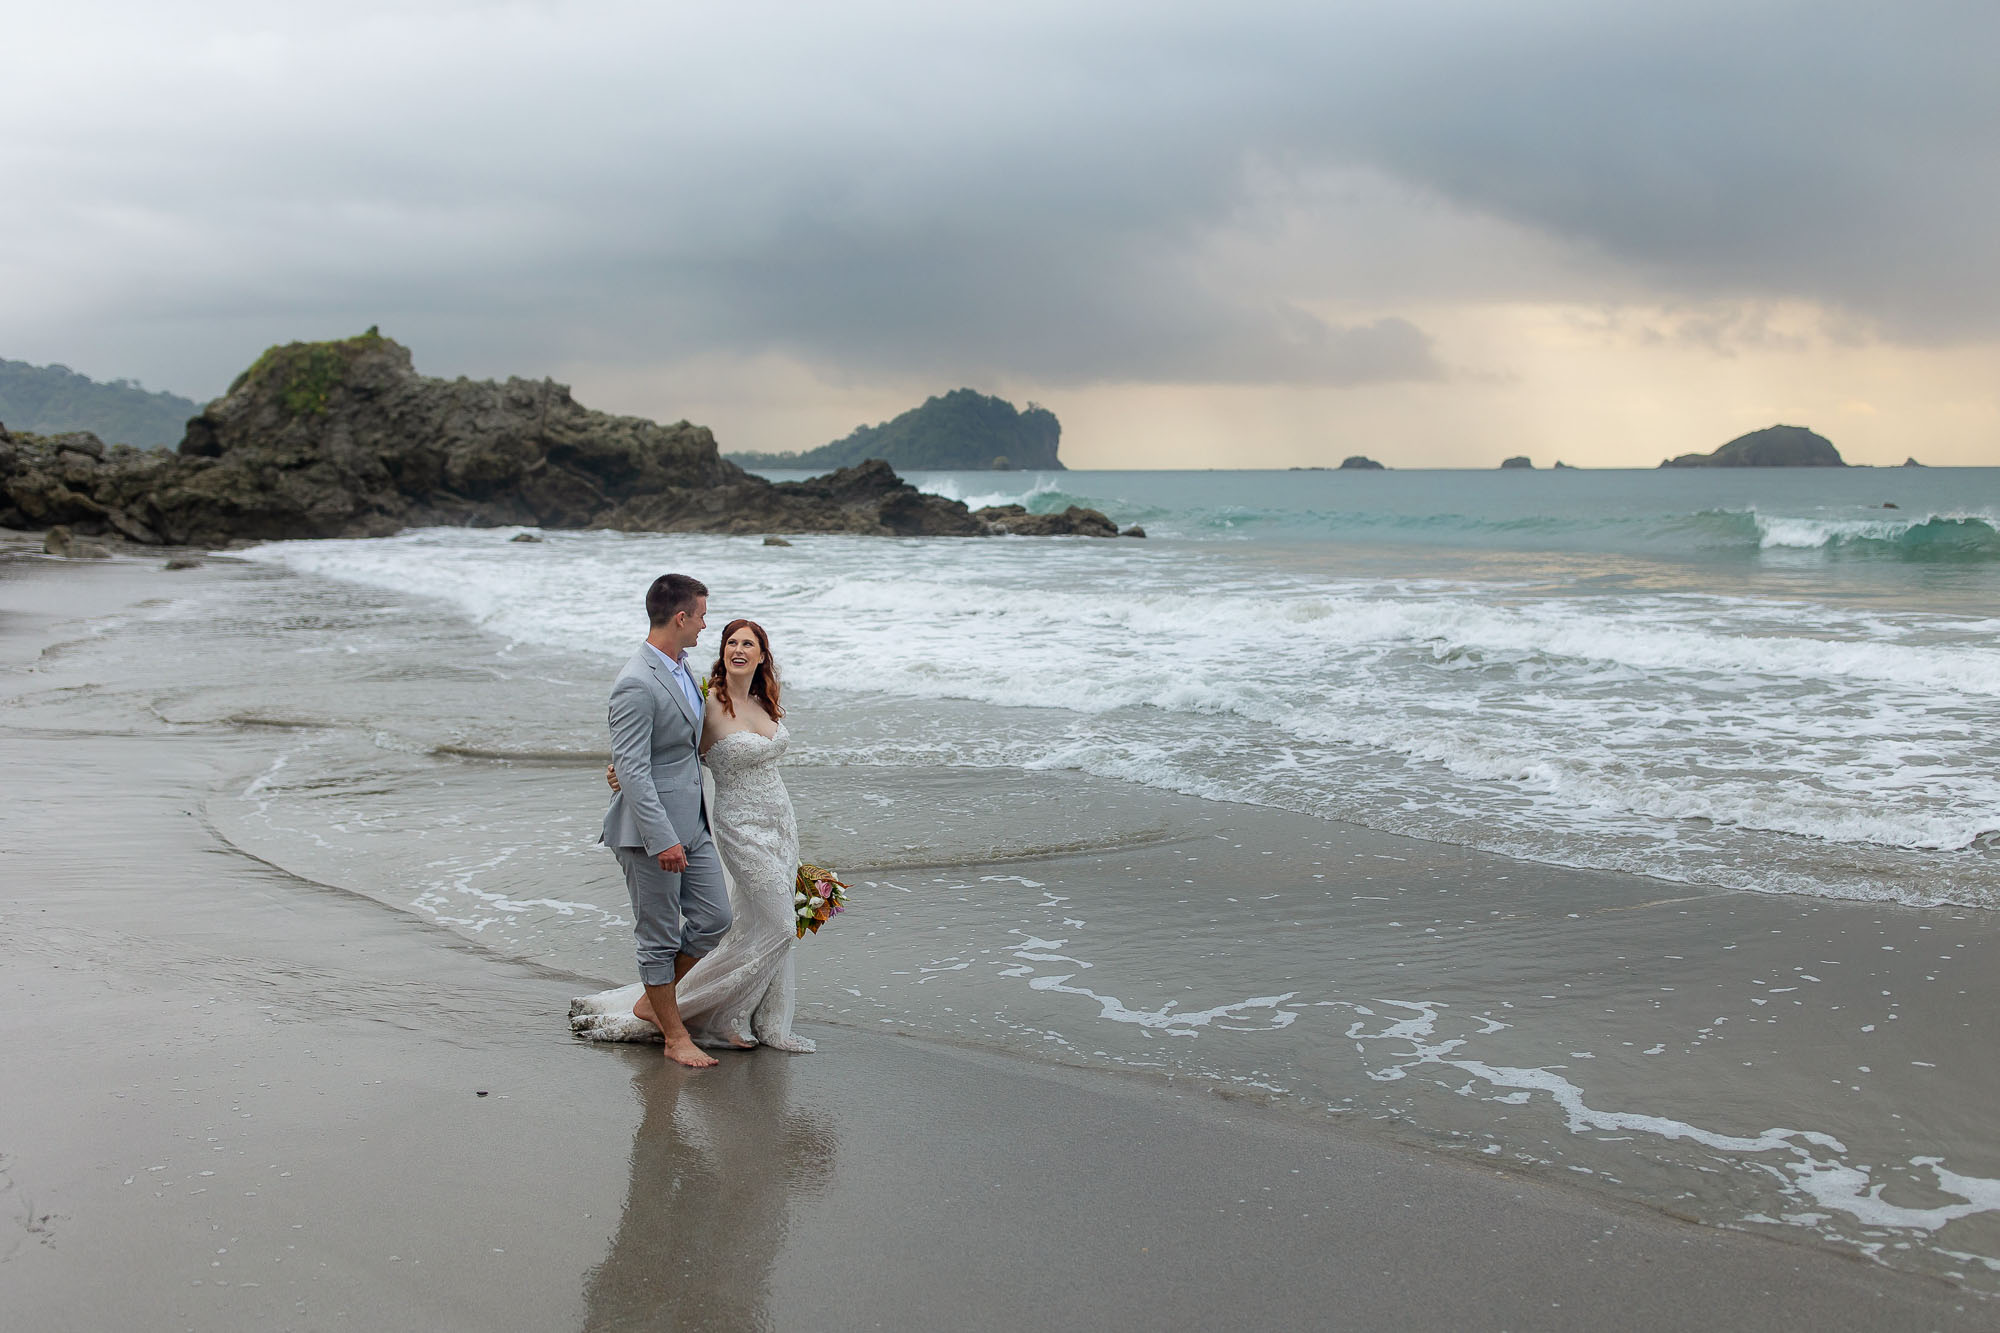 Bride and groom walking along the beach after a Costa Rica wedding